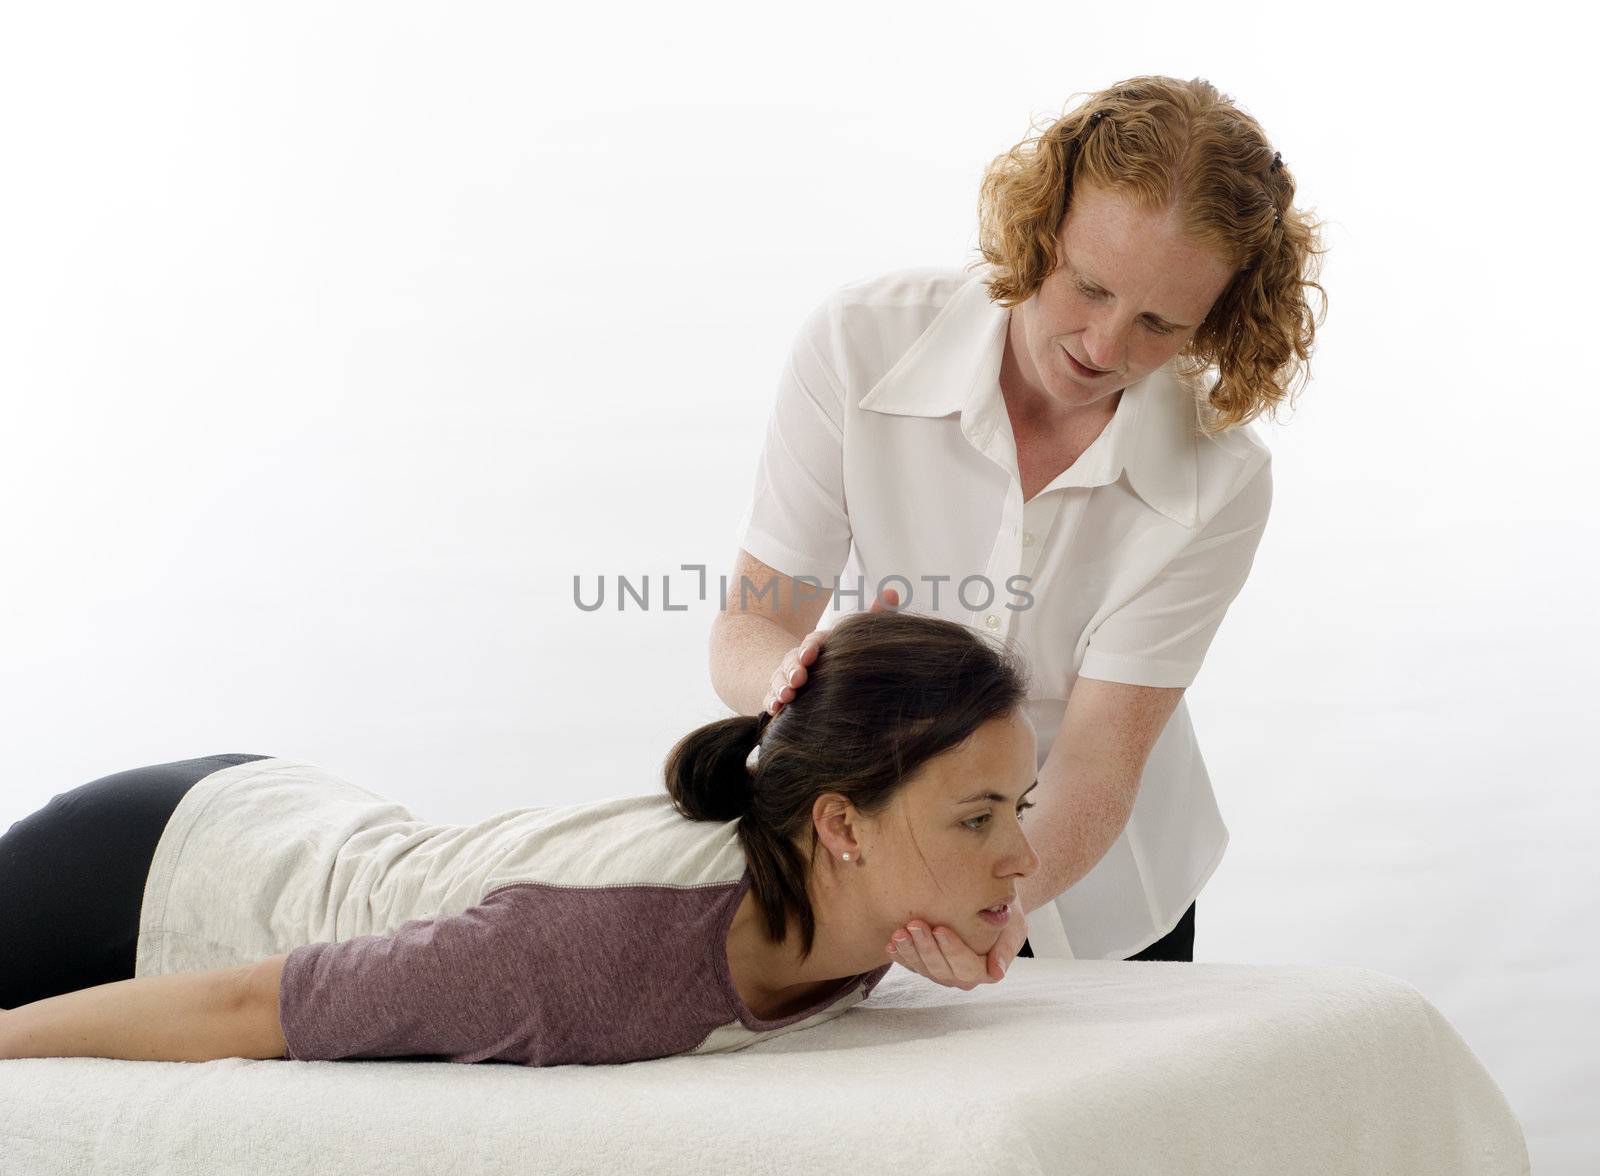 Kinesiologist or physiotherapist treating neck muscles